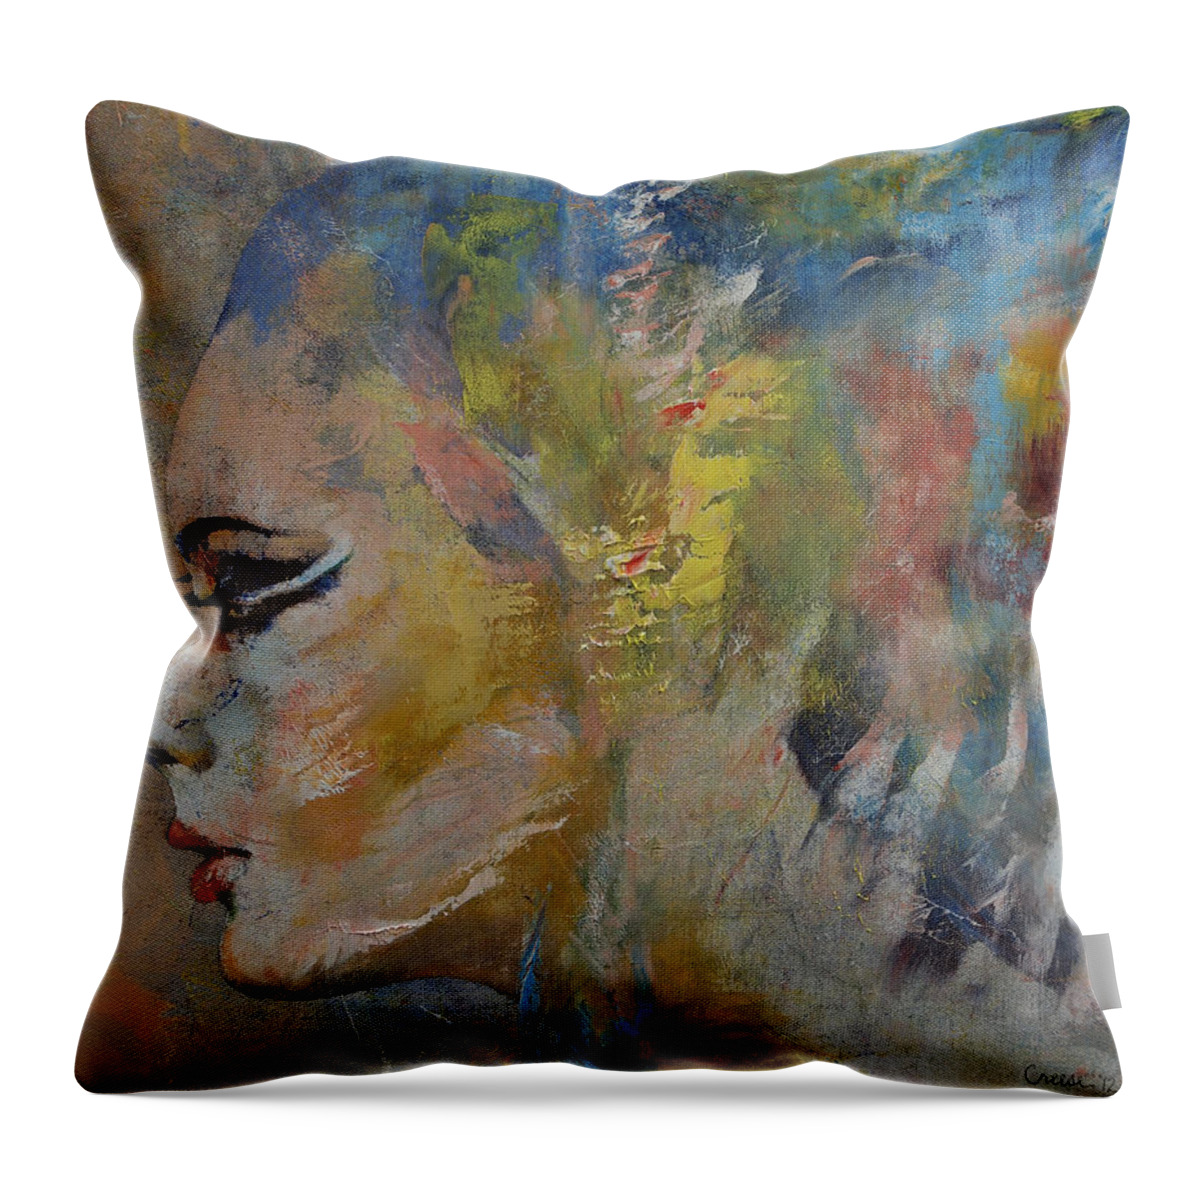 Mermaid Throw Pillow featuring the painting Mermaid Beauty by Michael Creese